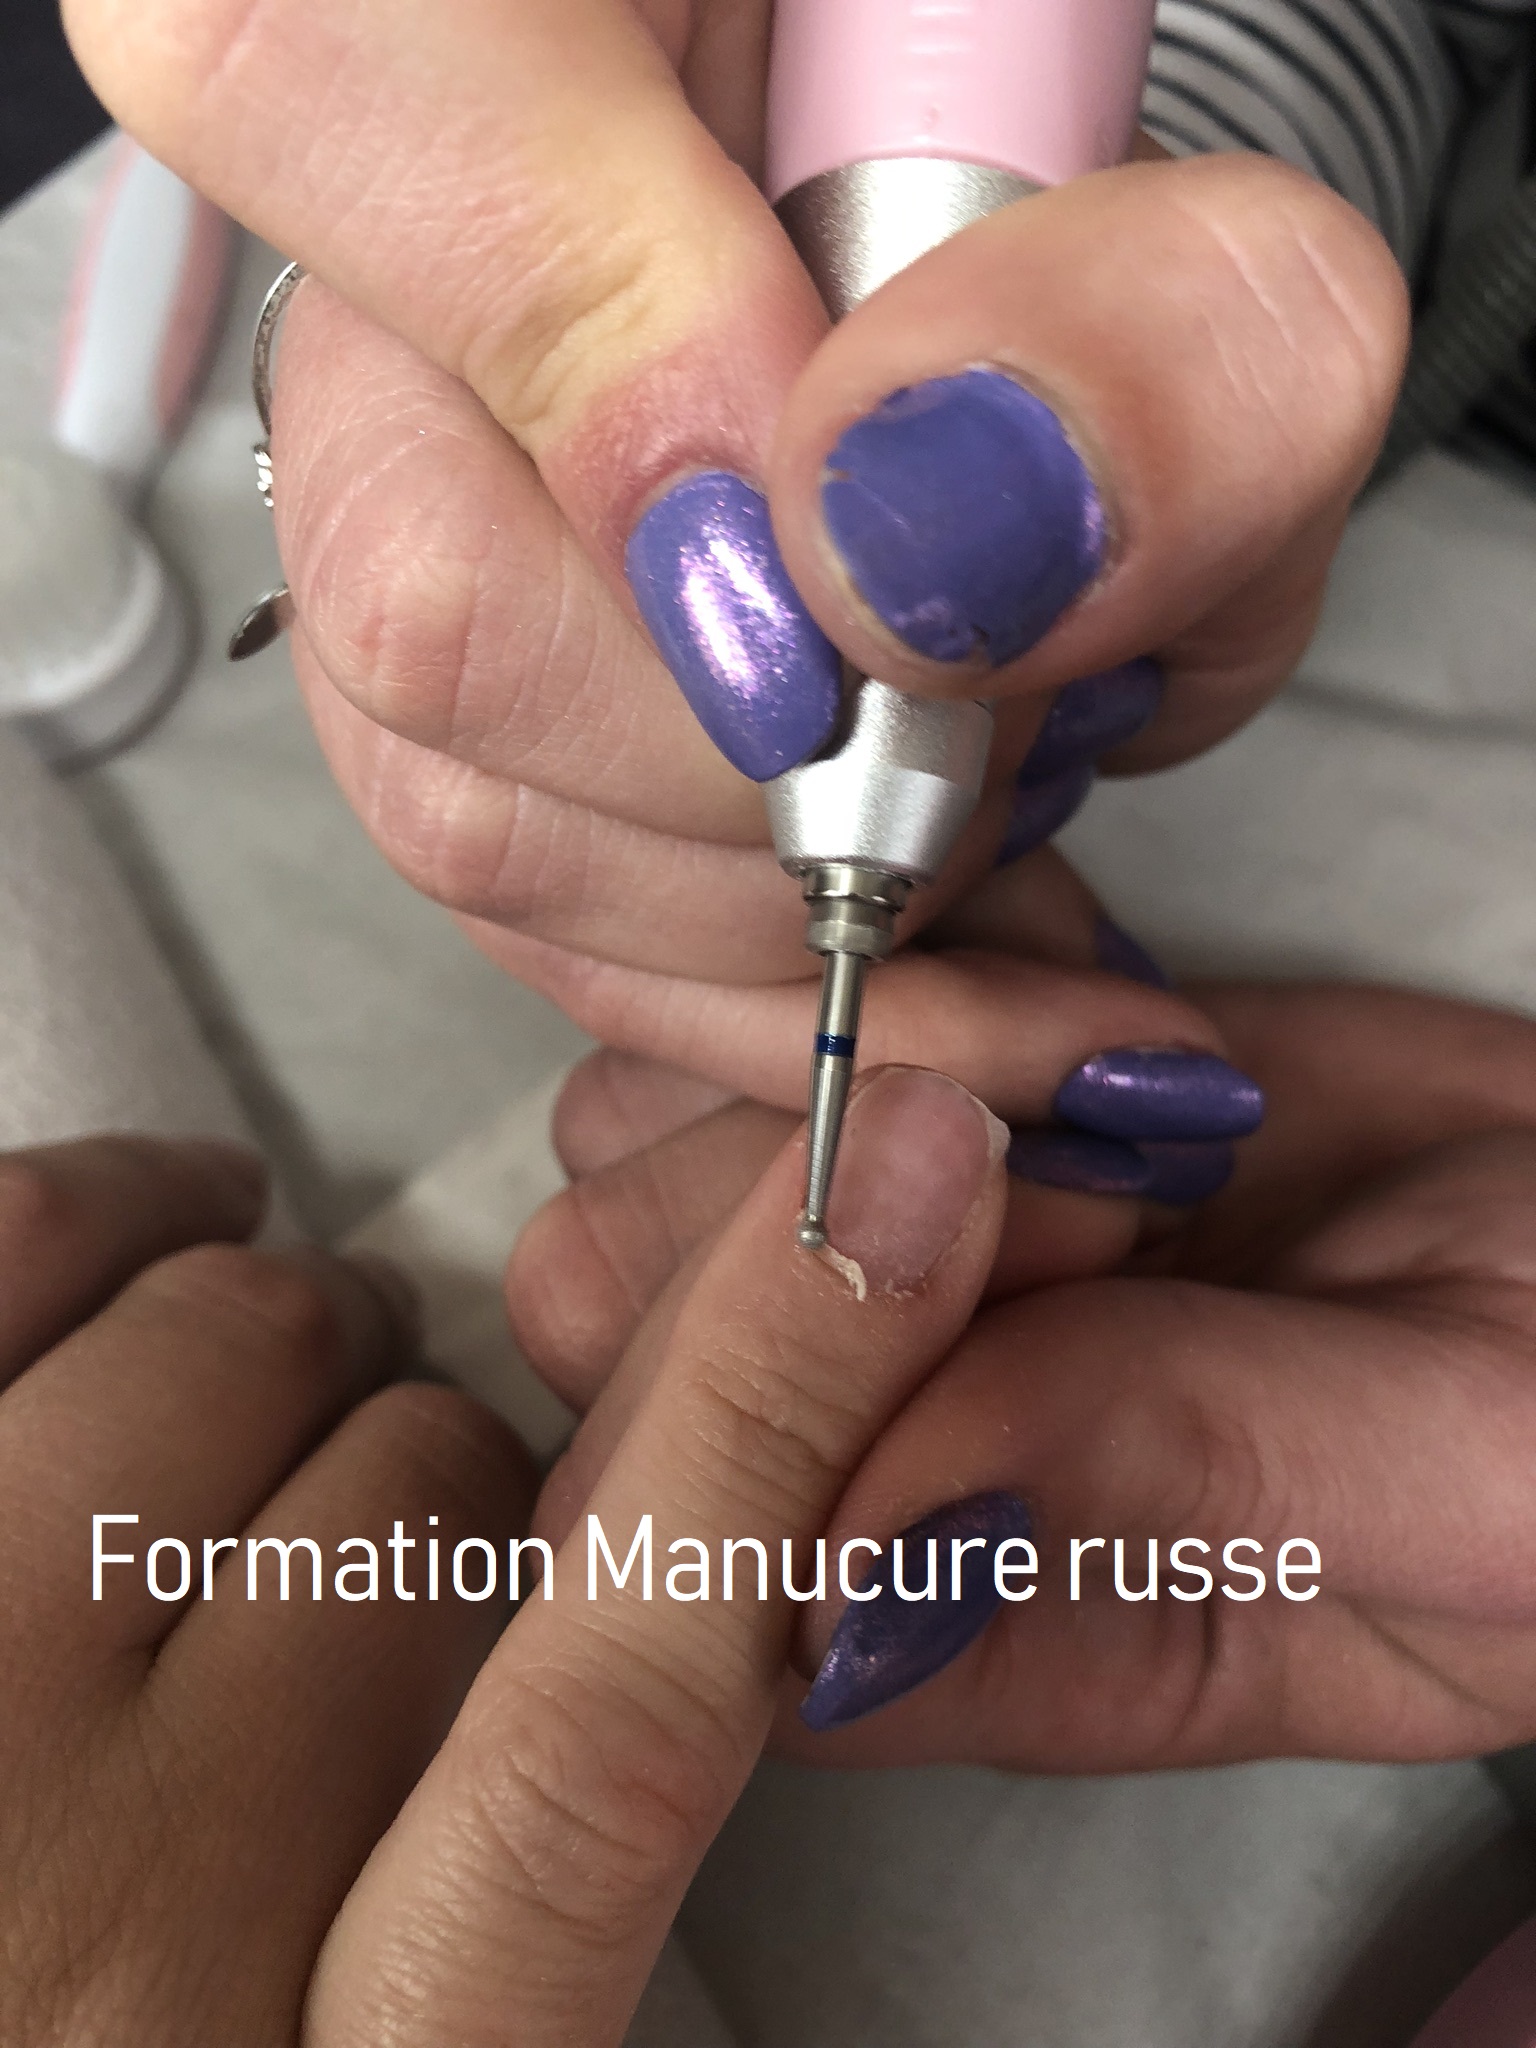 FORMATION MANUCURE RUSSE